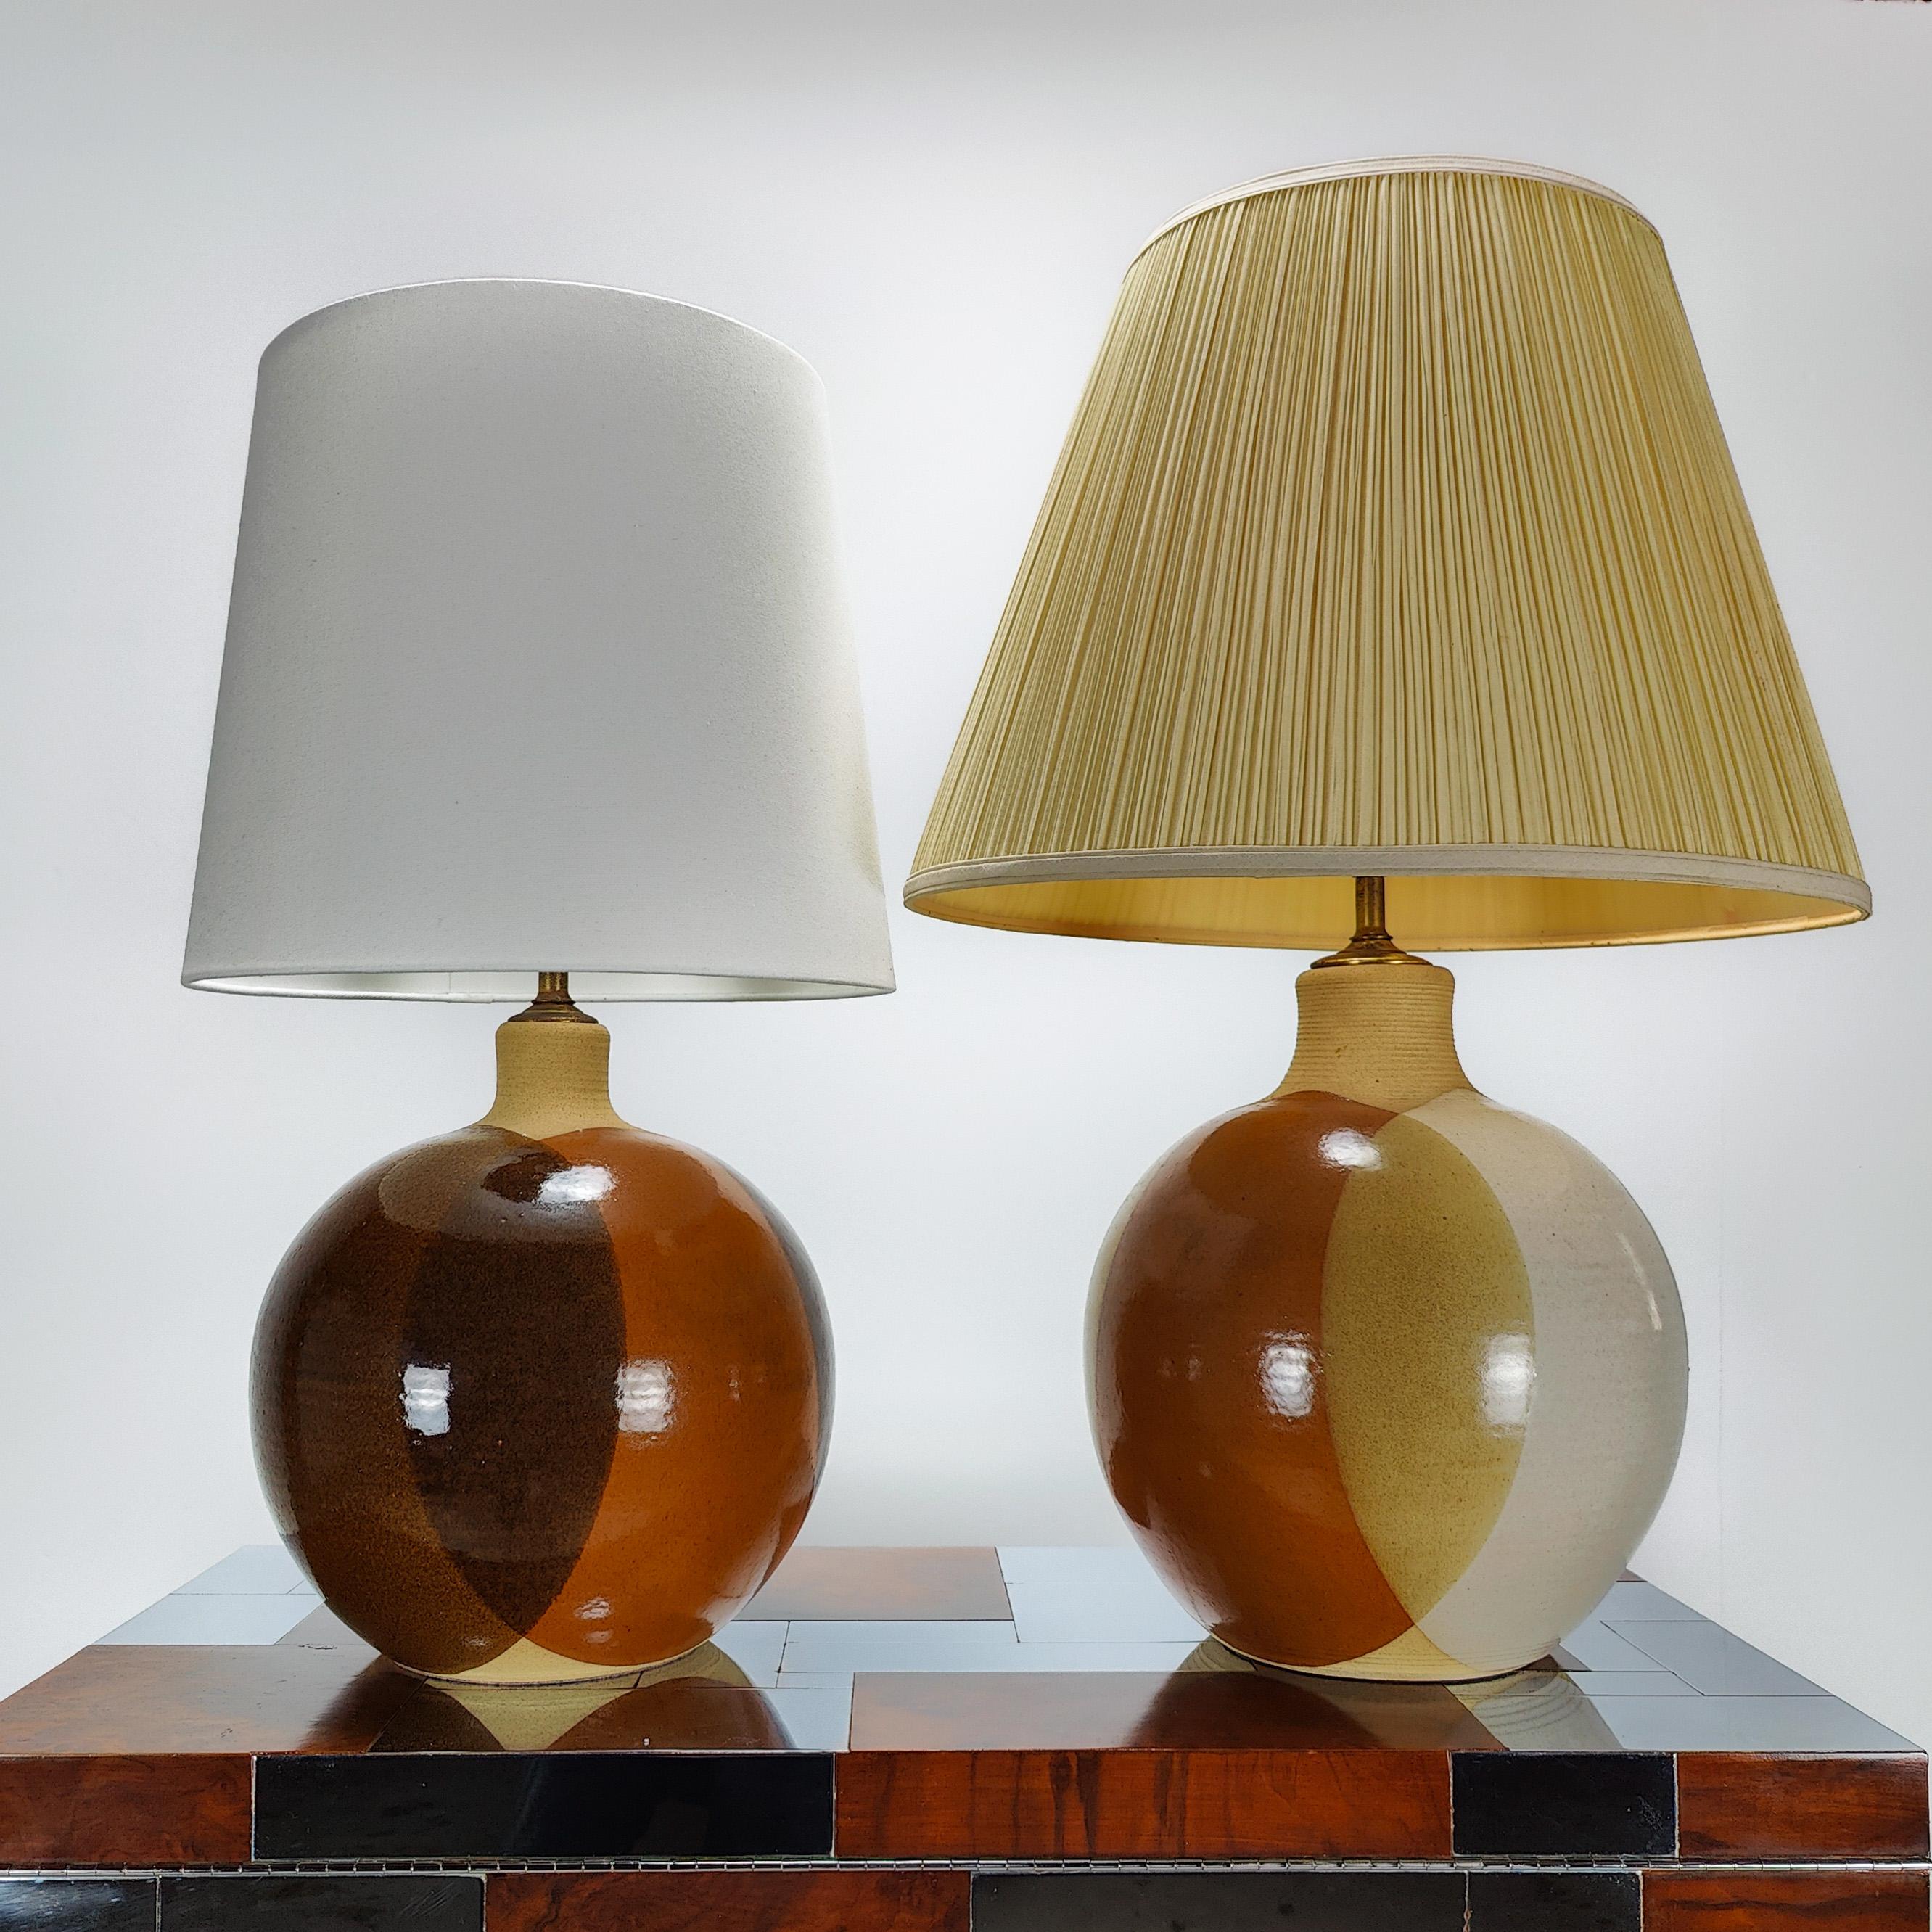 For your consideration are two table lamps by ceramist Larry and Terry Brown. Each feature a circular shaped body. Left measures 27h x 13 inches in circumference at widest point.; right measures 30h x 14 inches inches in circumference. Both made